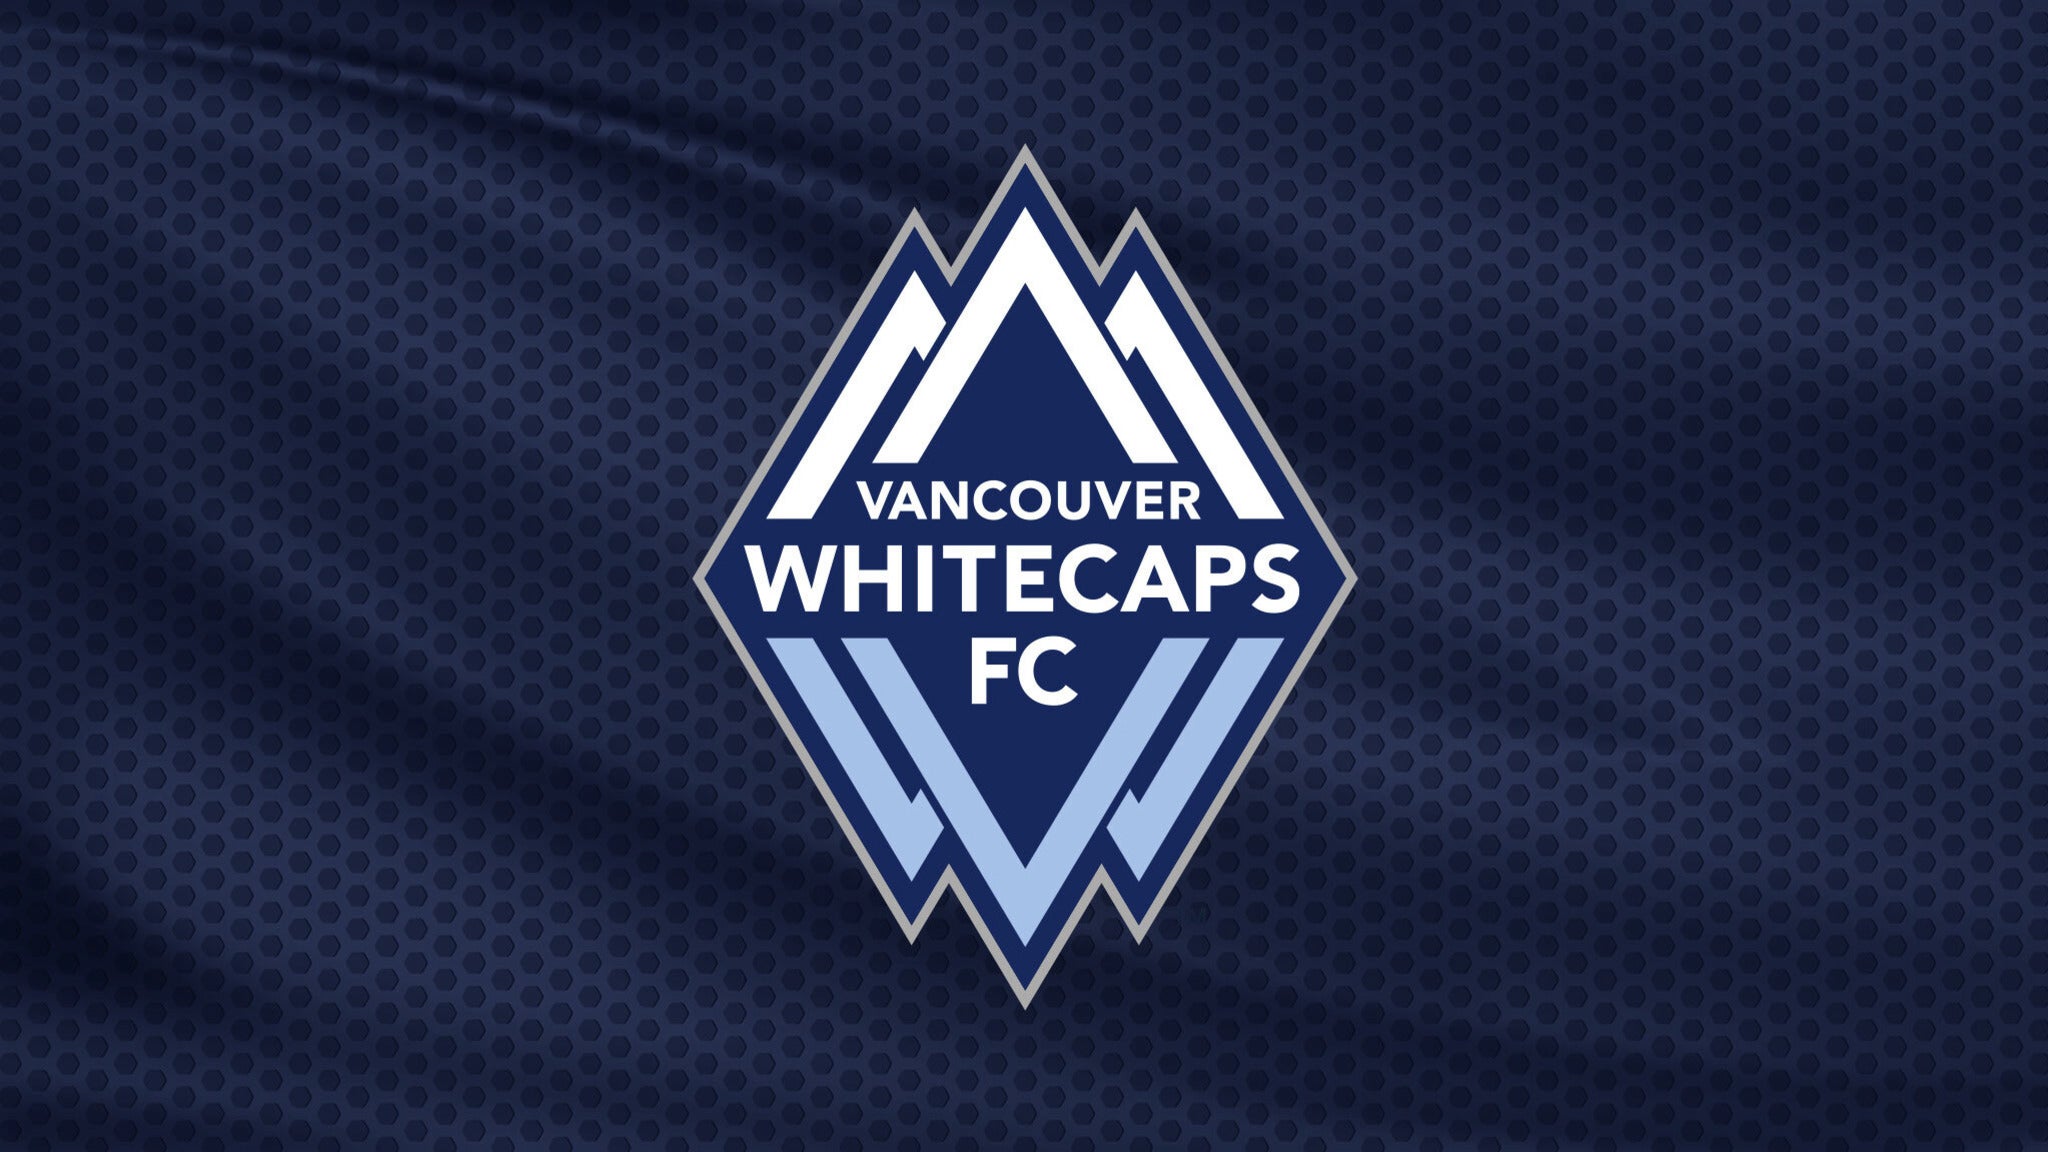 Vancouver Whitecaps FC vs. Seattle Sounders FC in Vancouver promo photo for Save The Fees Promo presale offer code